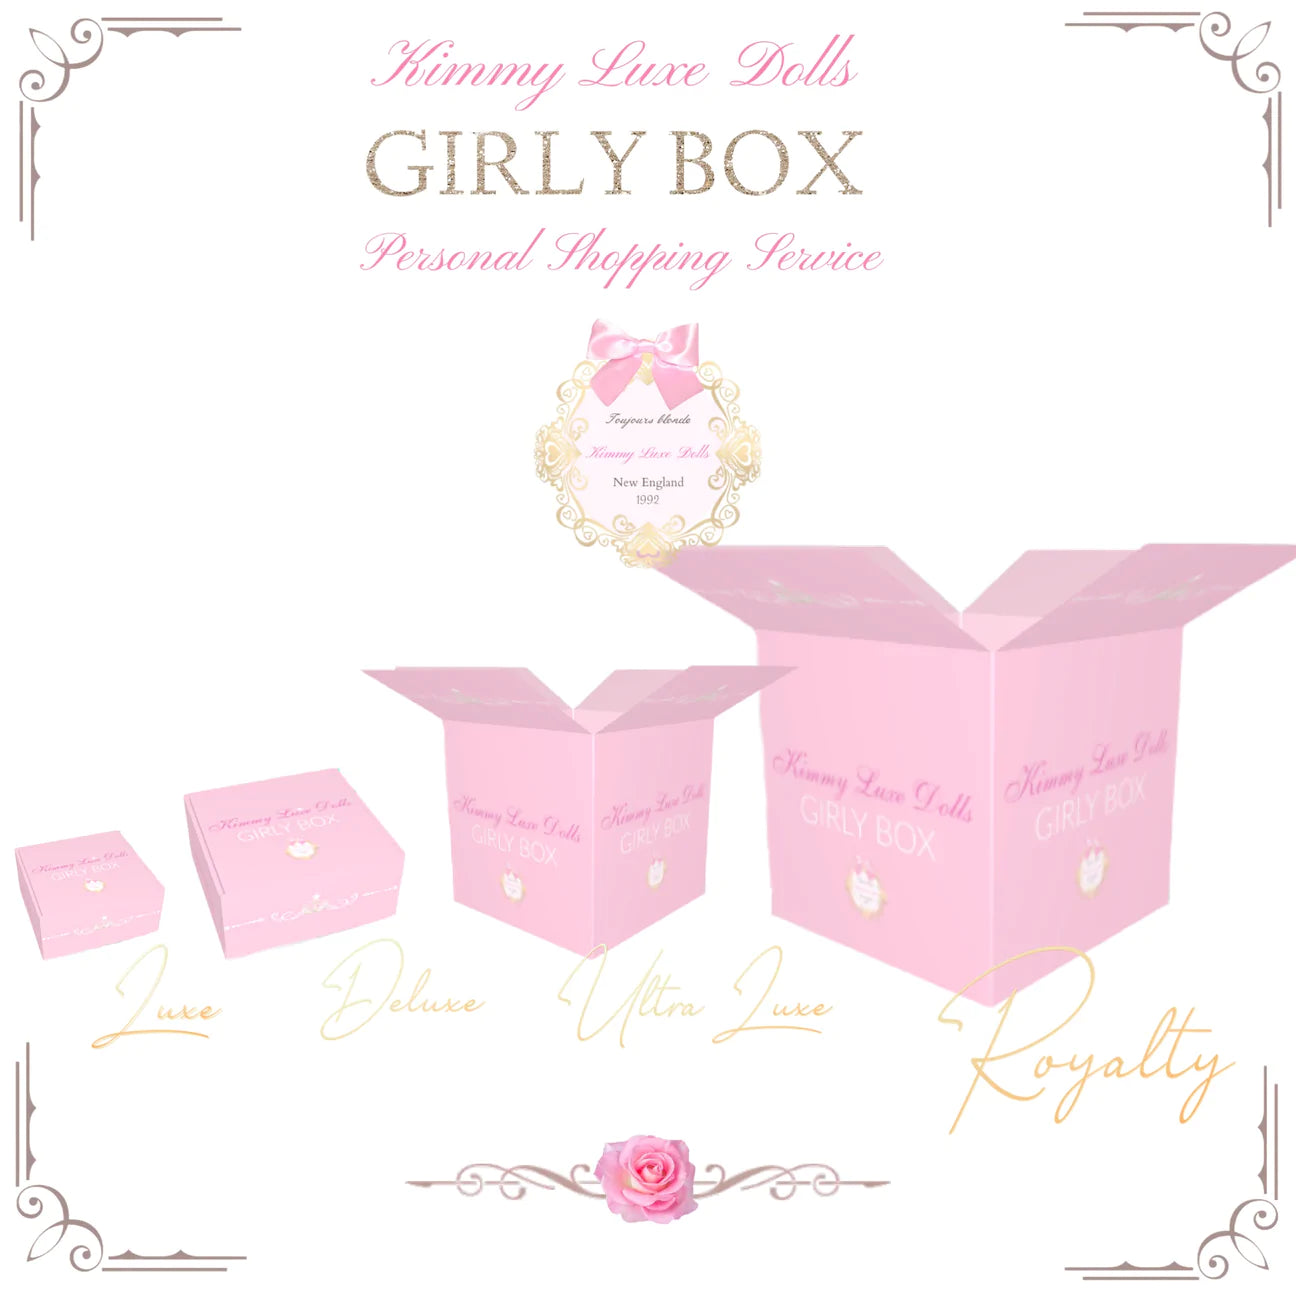 Girly Box 🎀 Three Month Subscription (Pay In Advance)